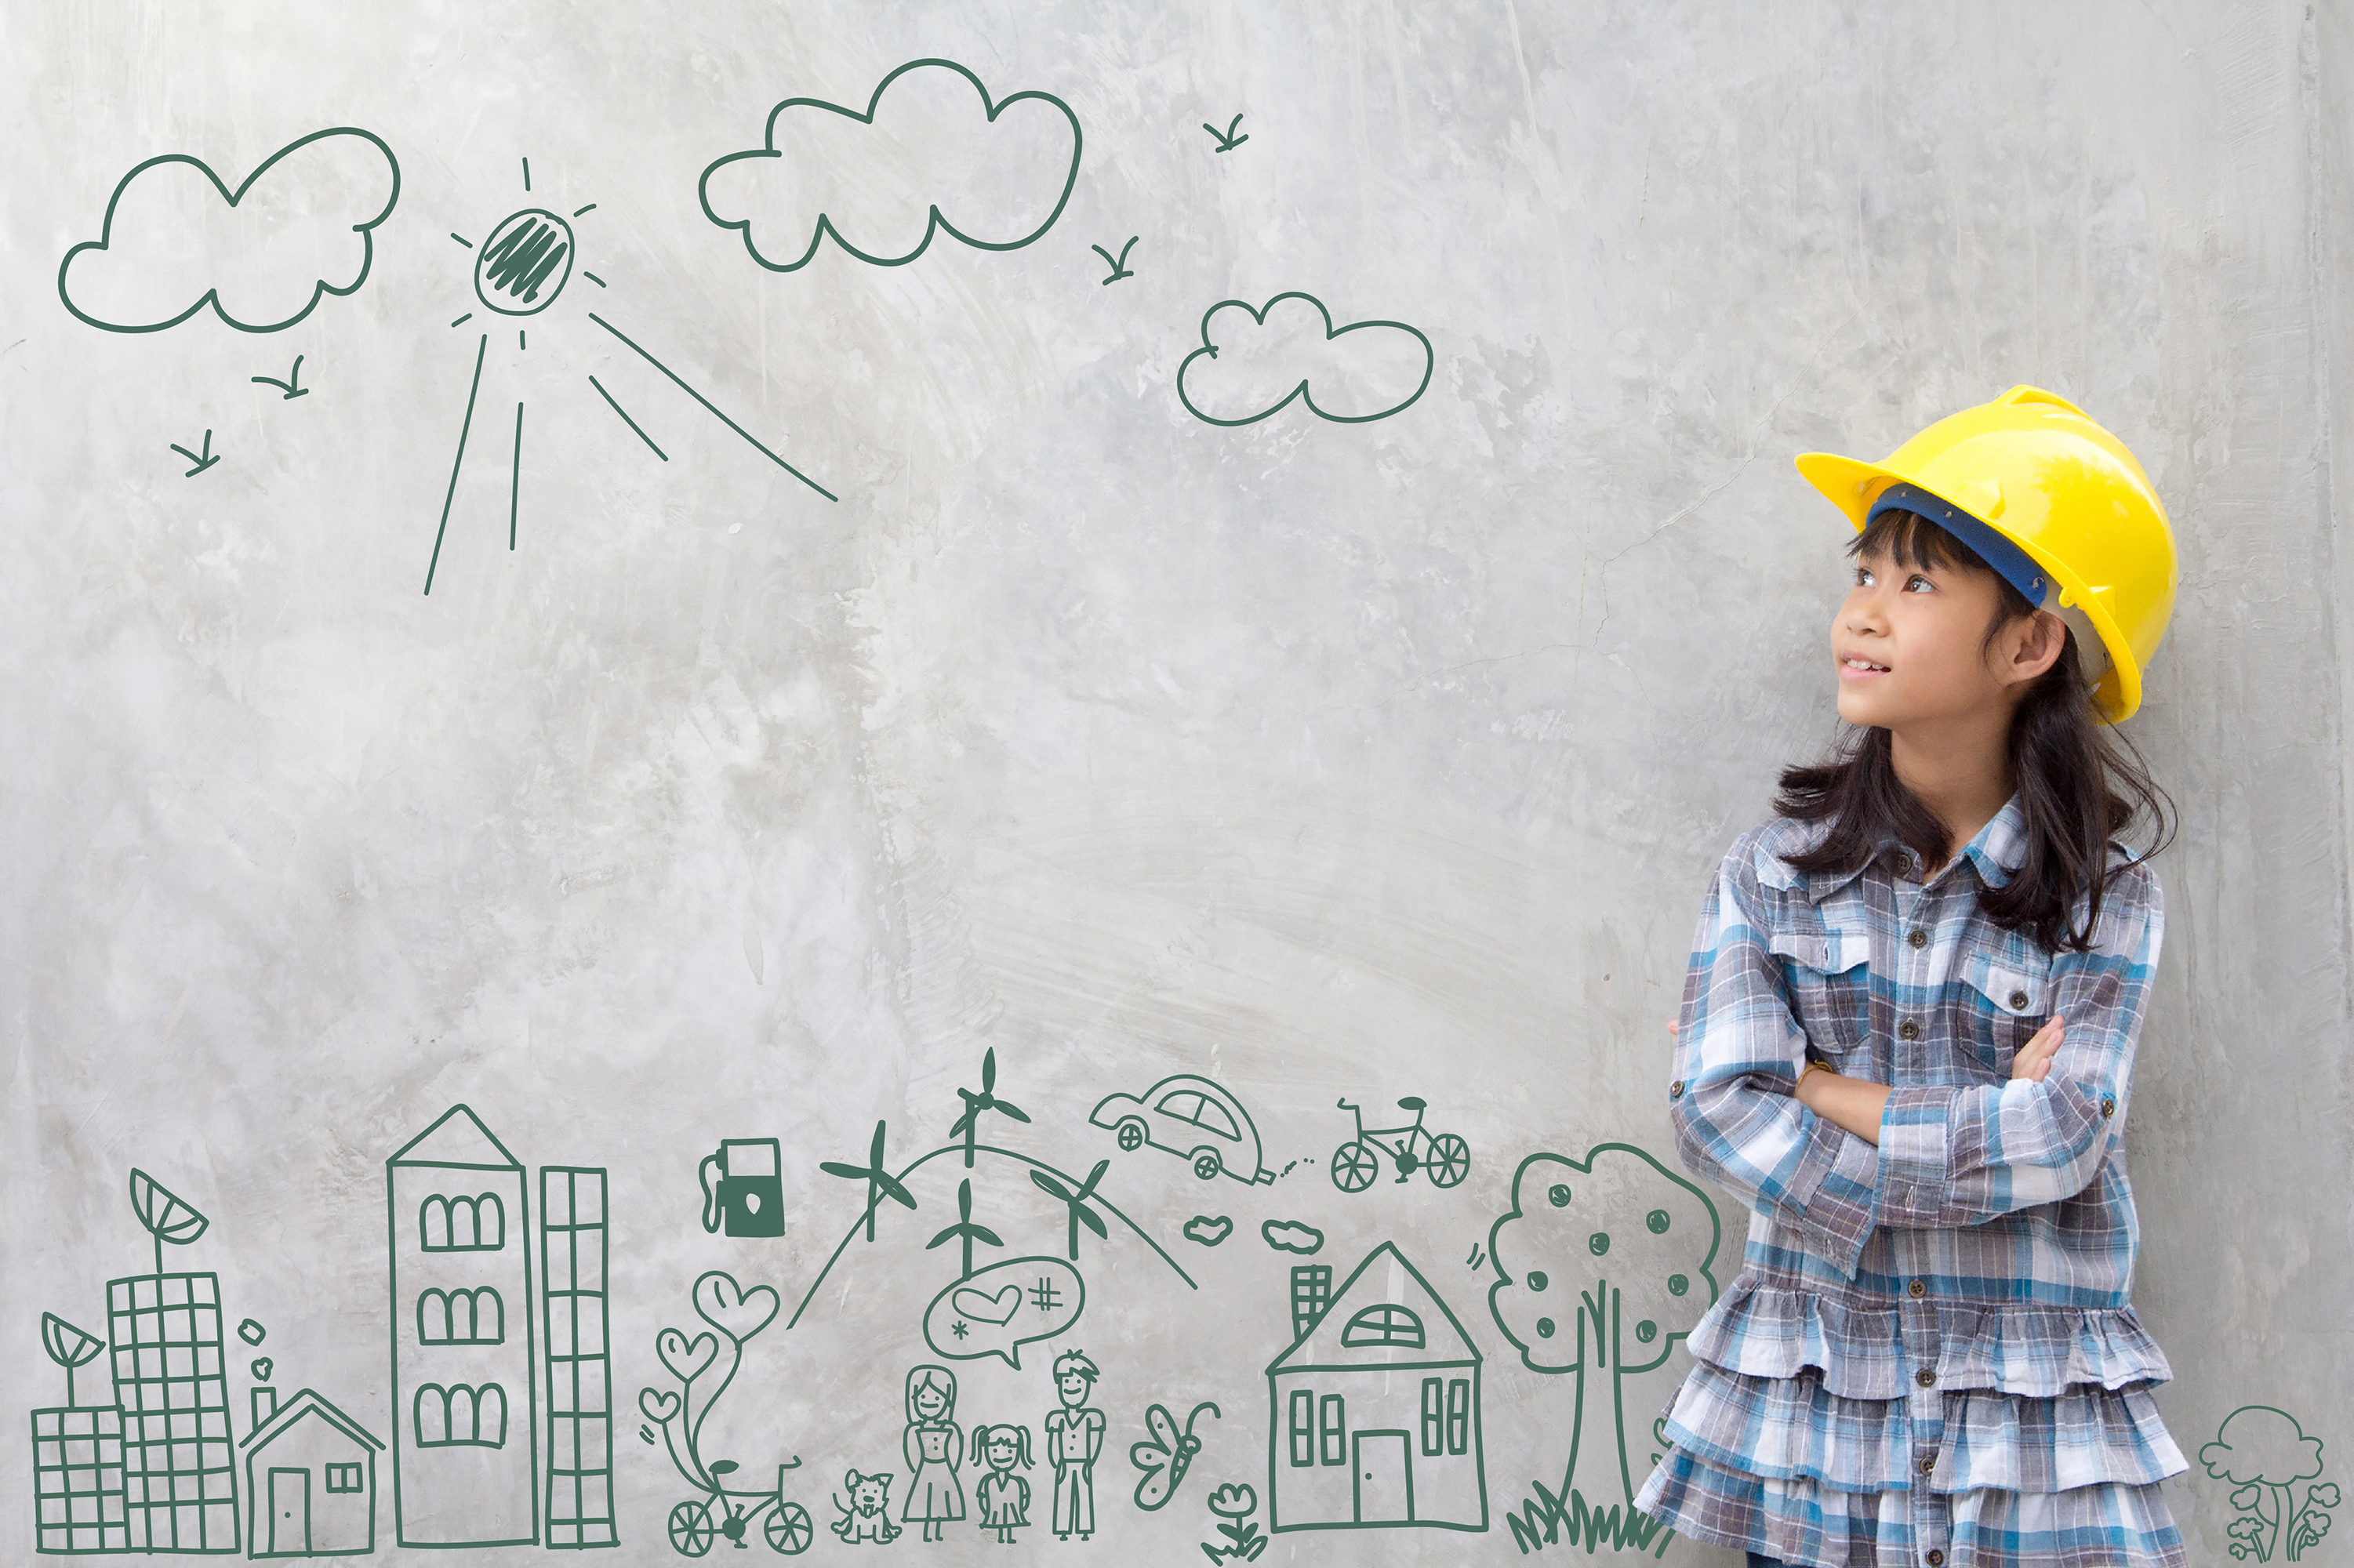 Little girl wearing construction hat against wall with cityscape drawn on it